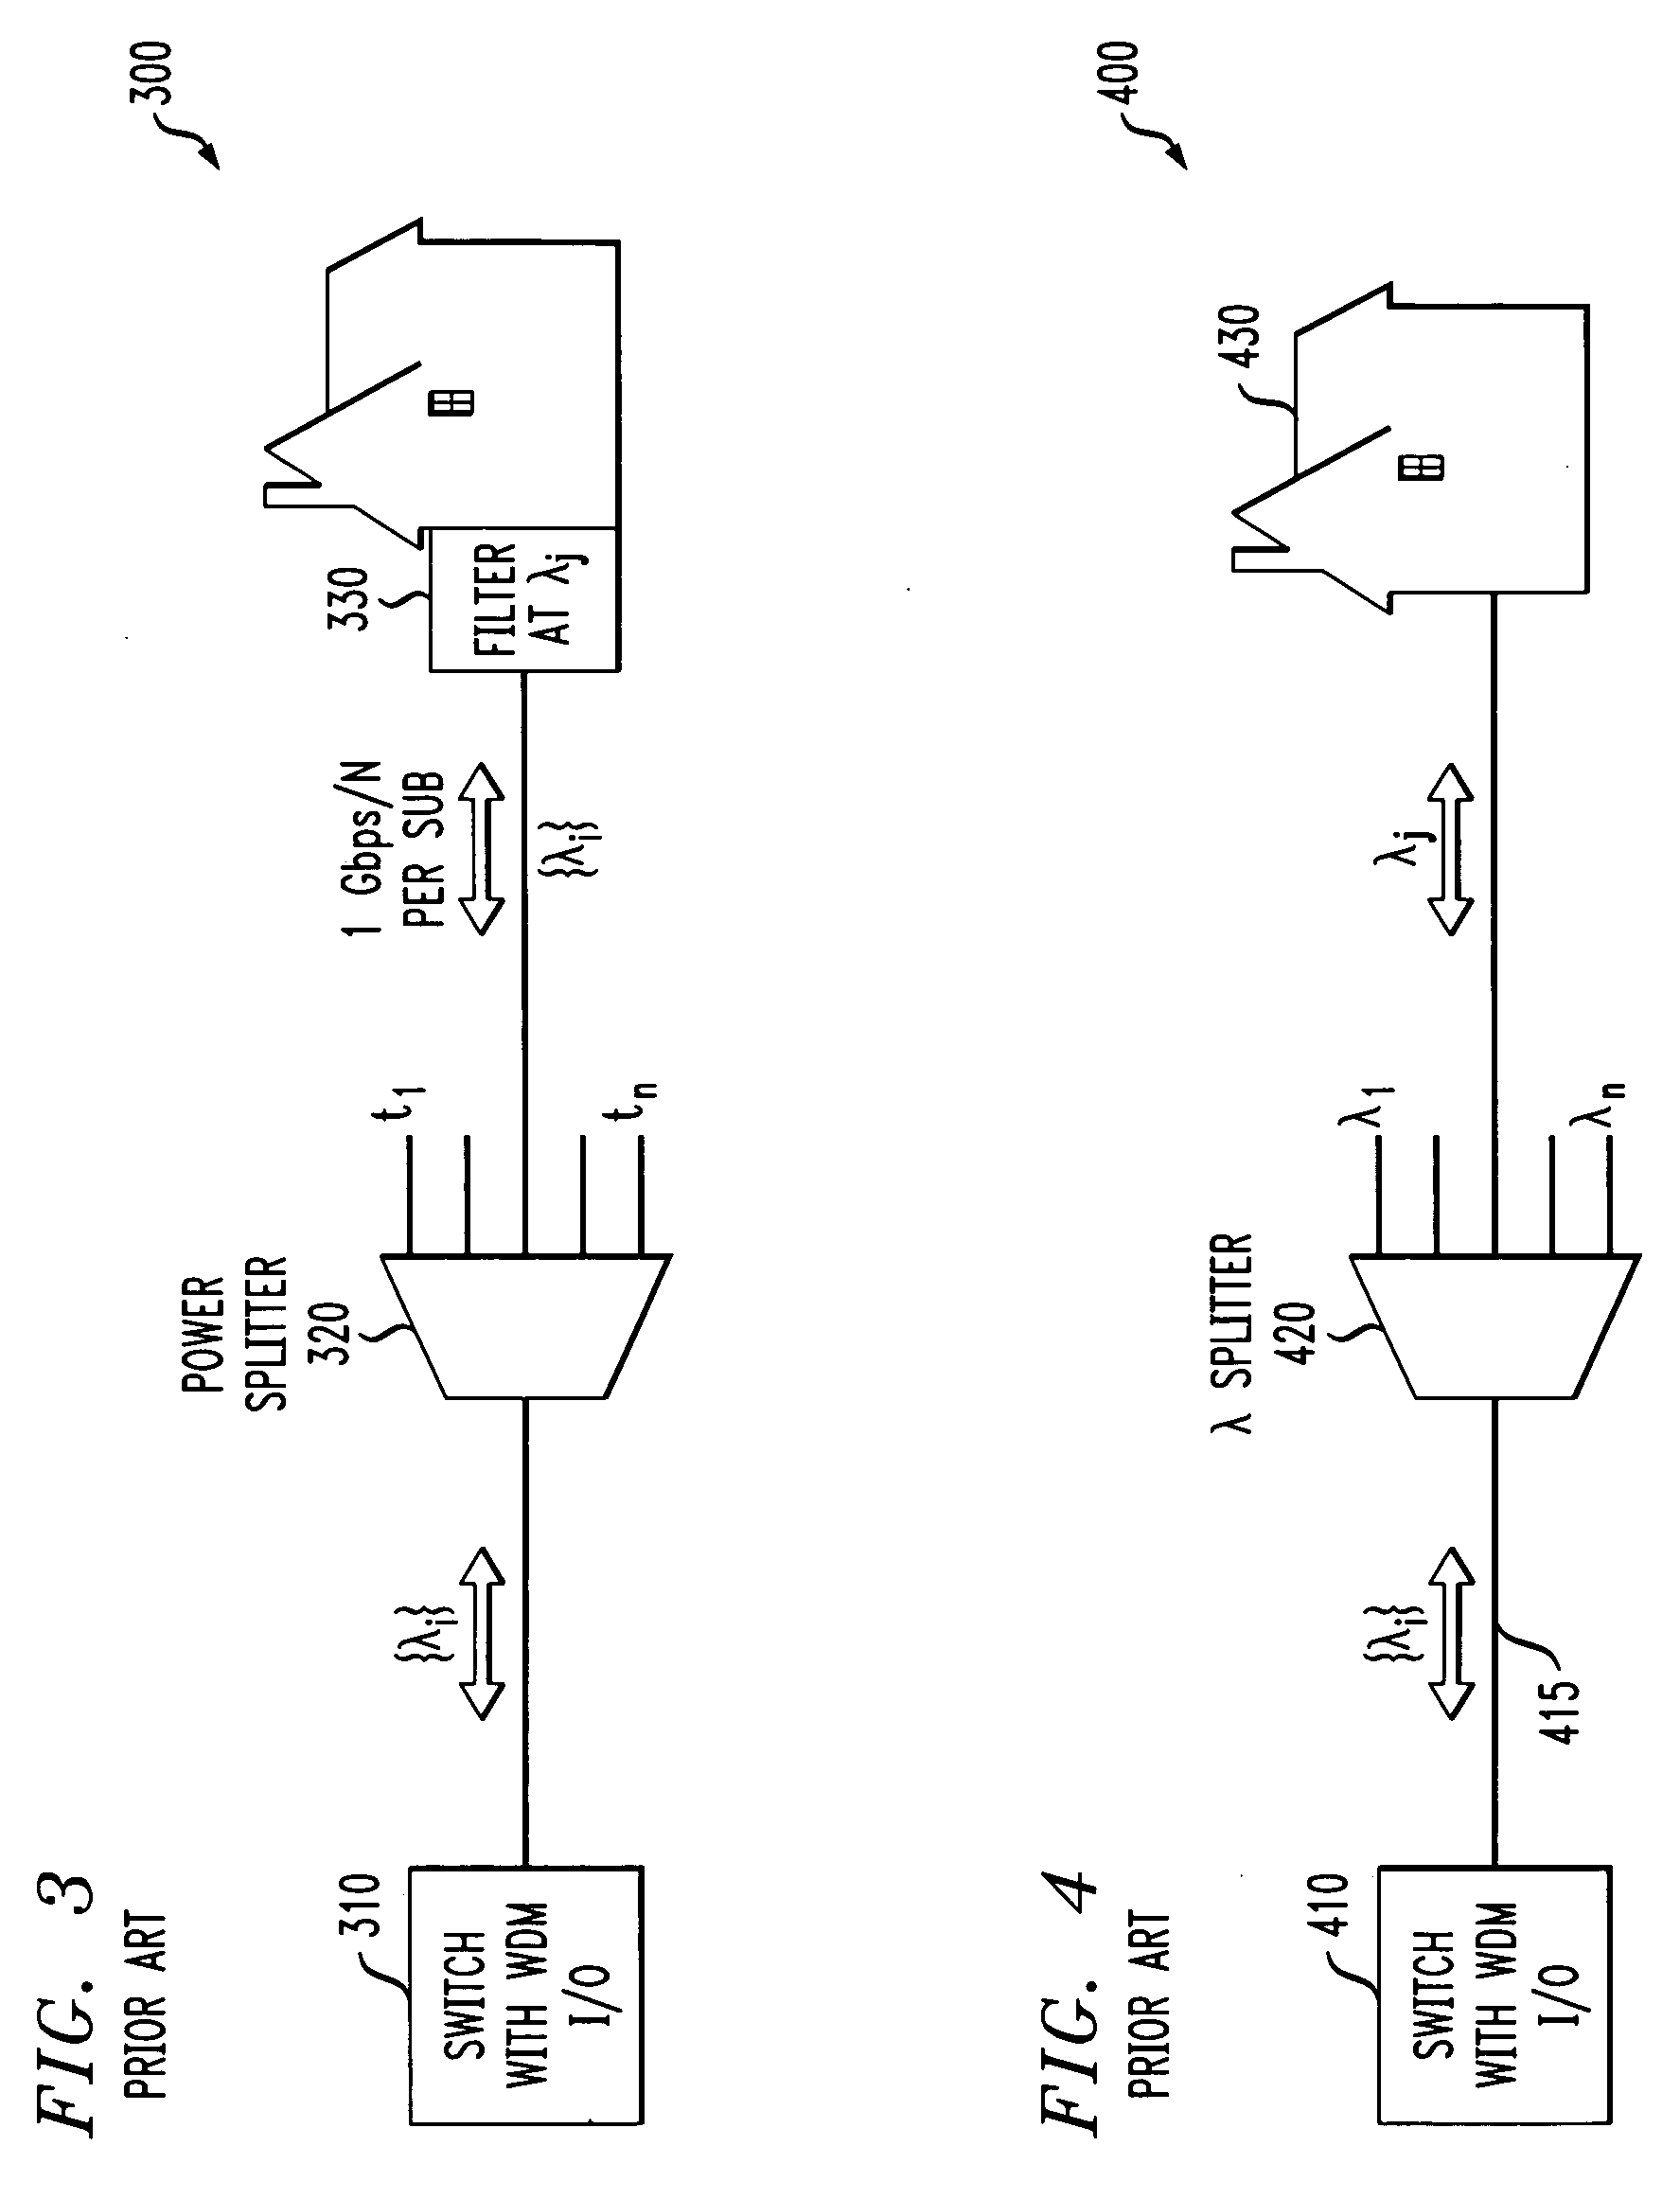 Method and apparatus for increasing downstream bandwidth of a passive optical network using integrated WDM/power spitting devices and tunable lasers